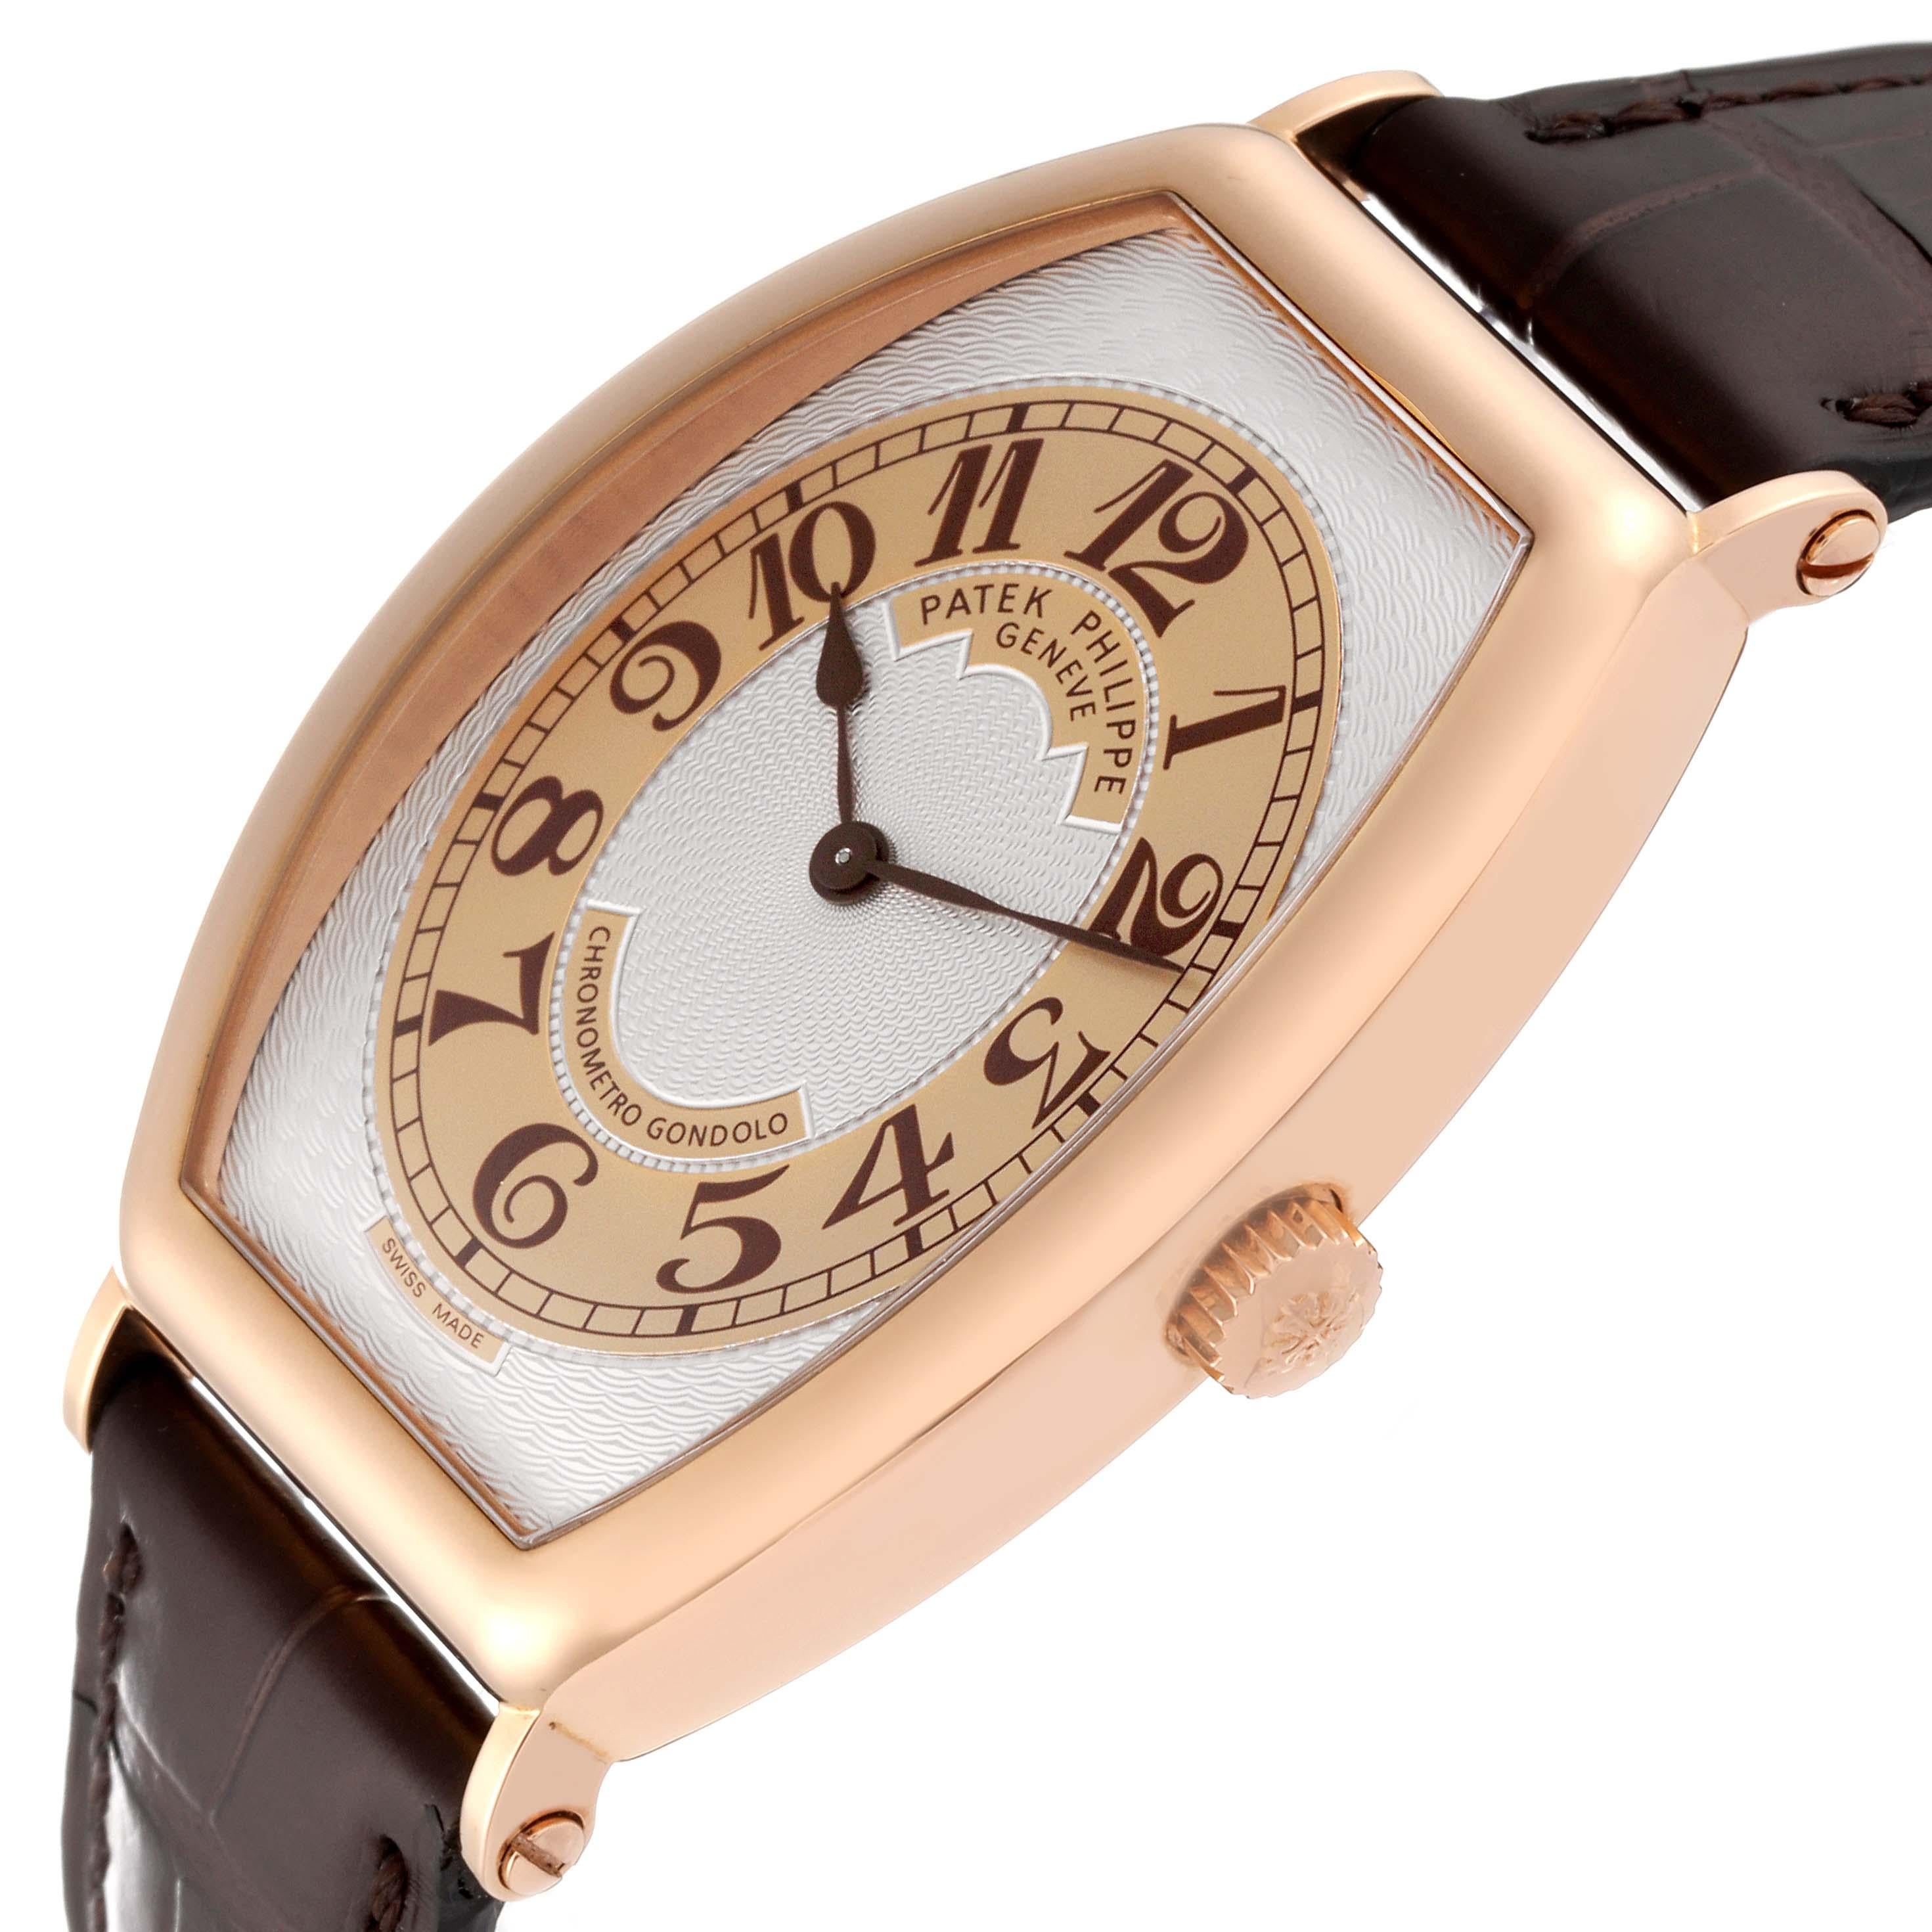 Patek Philippe Gondolo Rose Gold Brown Strap Mens Watch 5098 Box Papers In Excellent Condition For Sale In Atlanta, GA